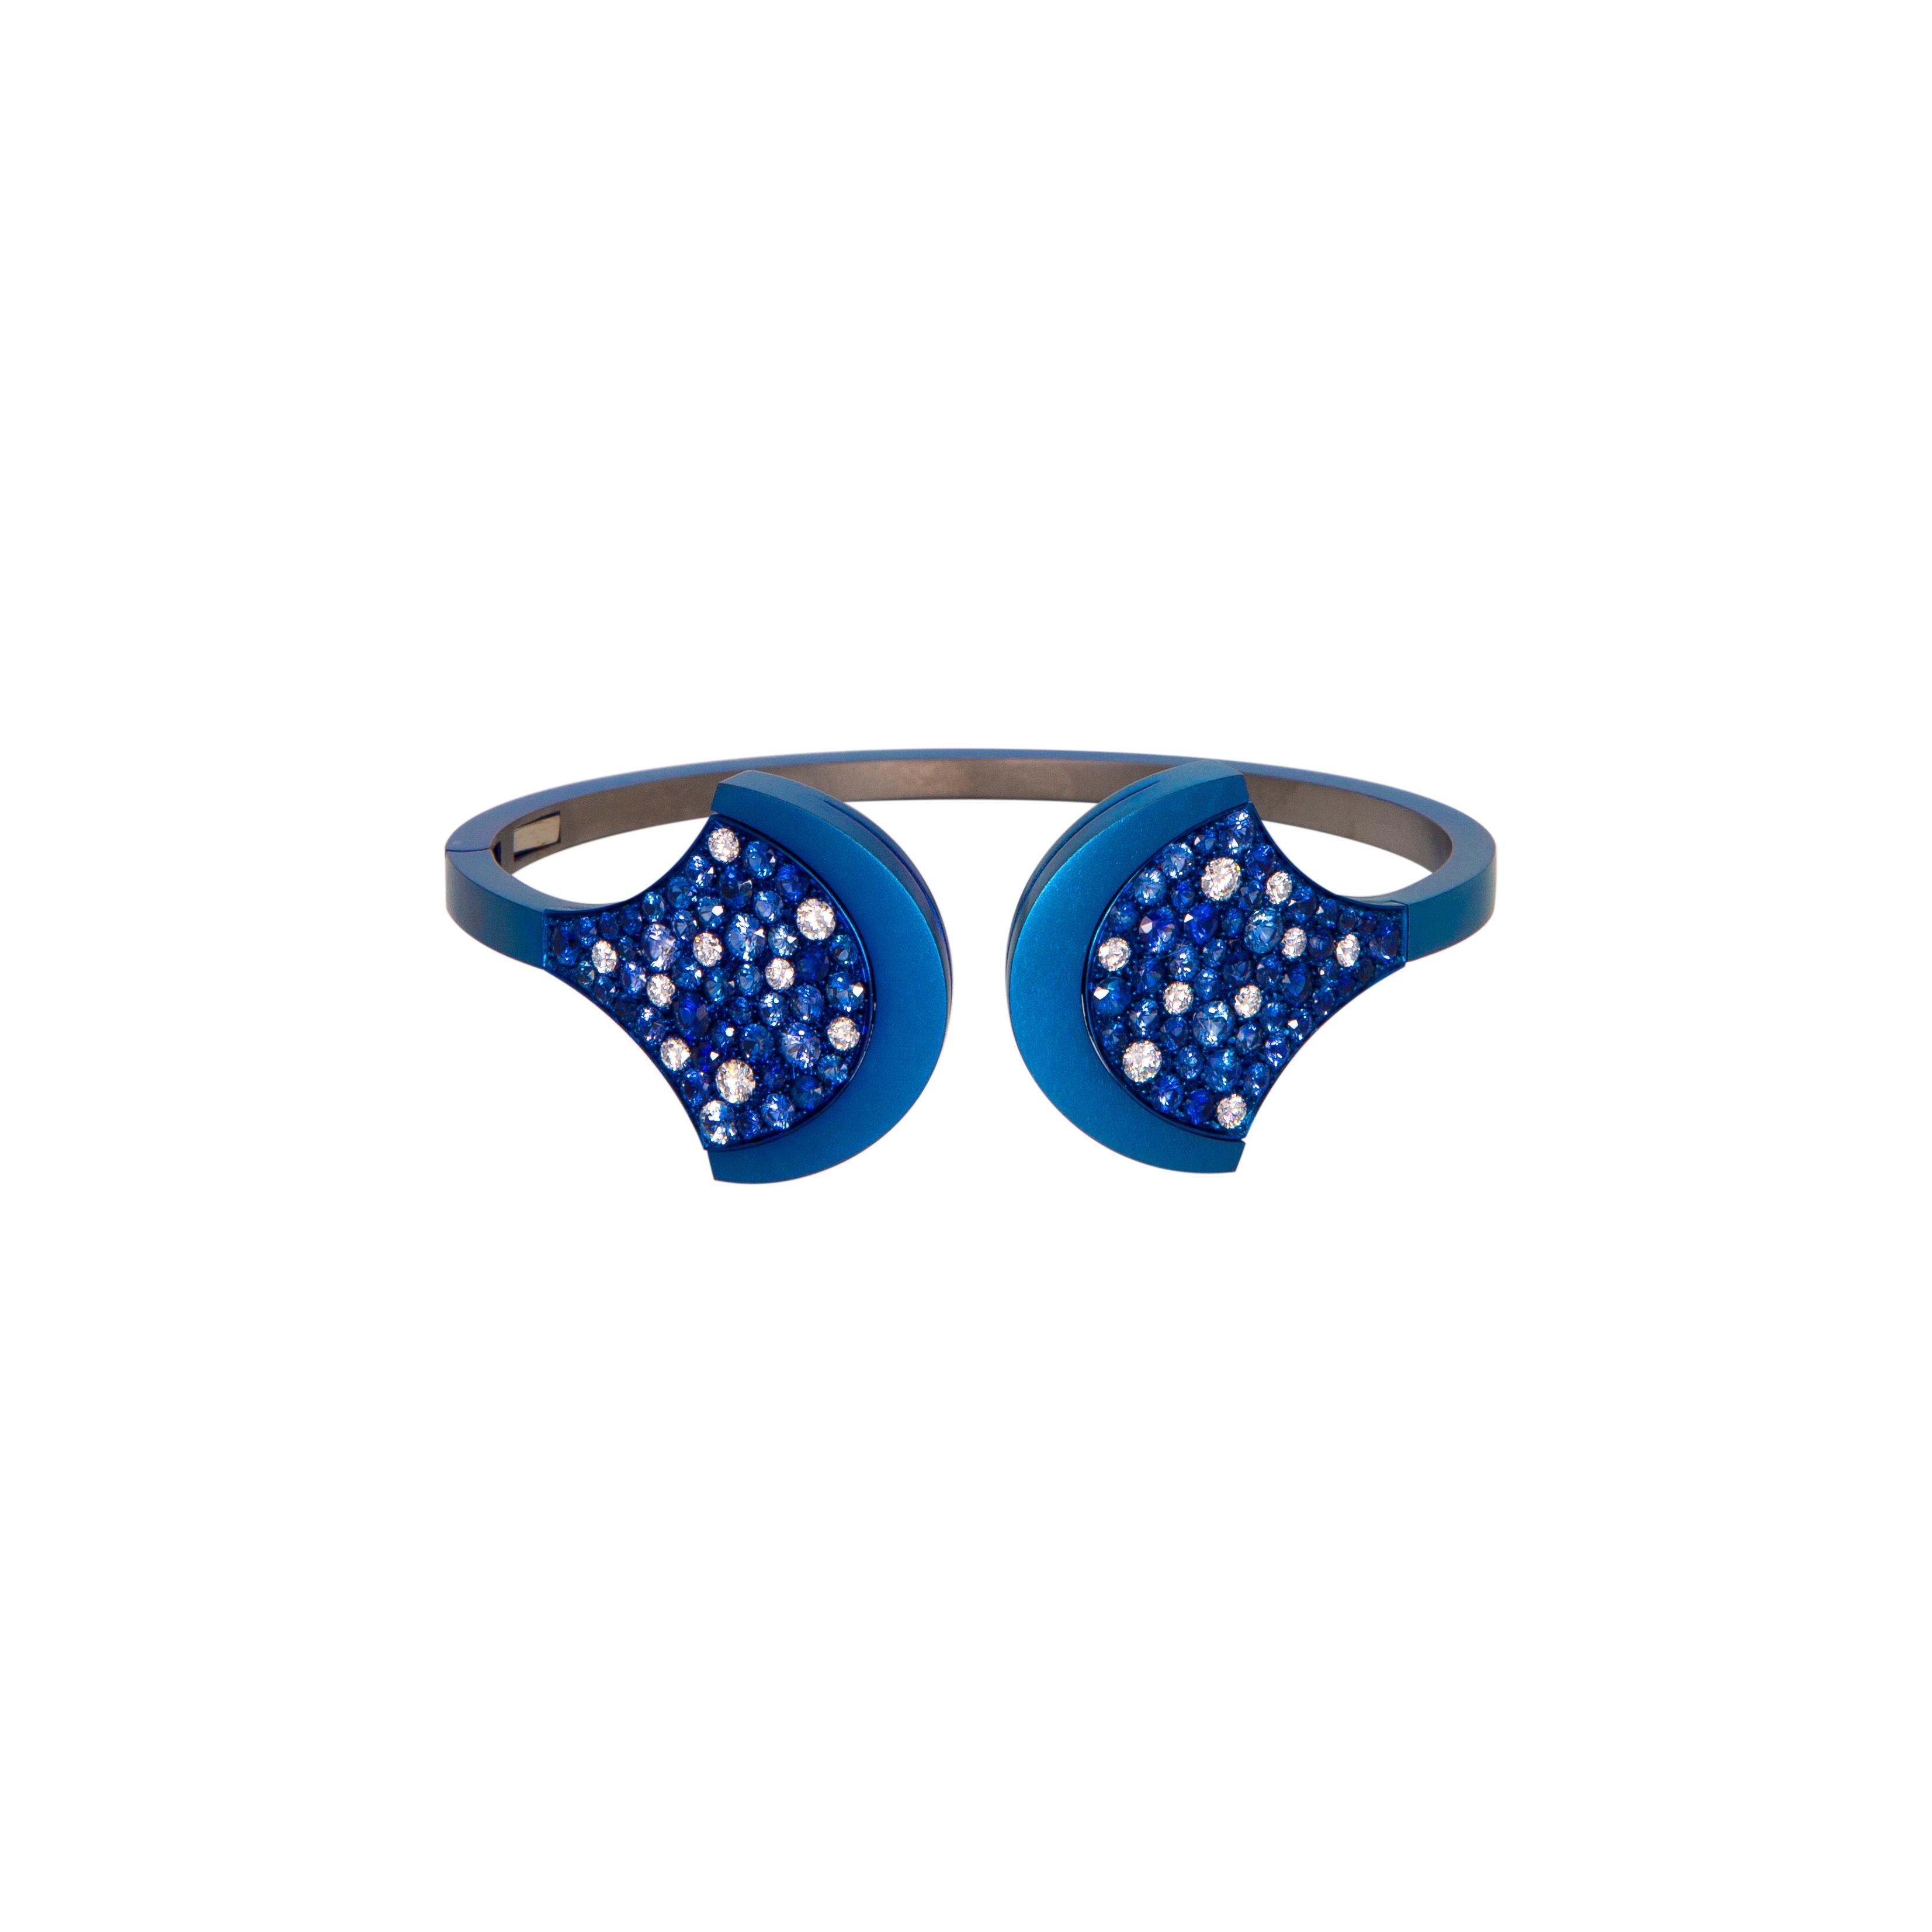 Bangle Blue Titatium with Diamonds and Blue Sapphire.
Luxury Jewel for your Own Collection.
Unique Bangle Manufactured in Titanium Extra Light with Diamonds ct. 0.75 (n.18 stones) and Blue Sapphire ct. 4.56 (n.86 stones). Titanium is around 11.30